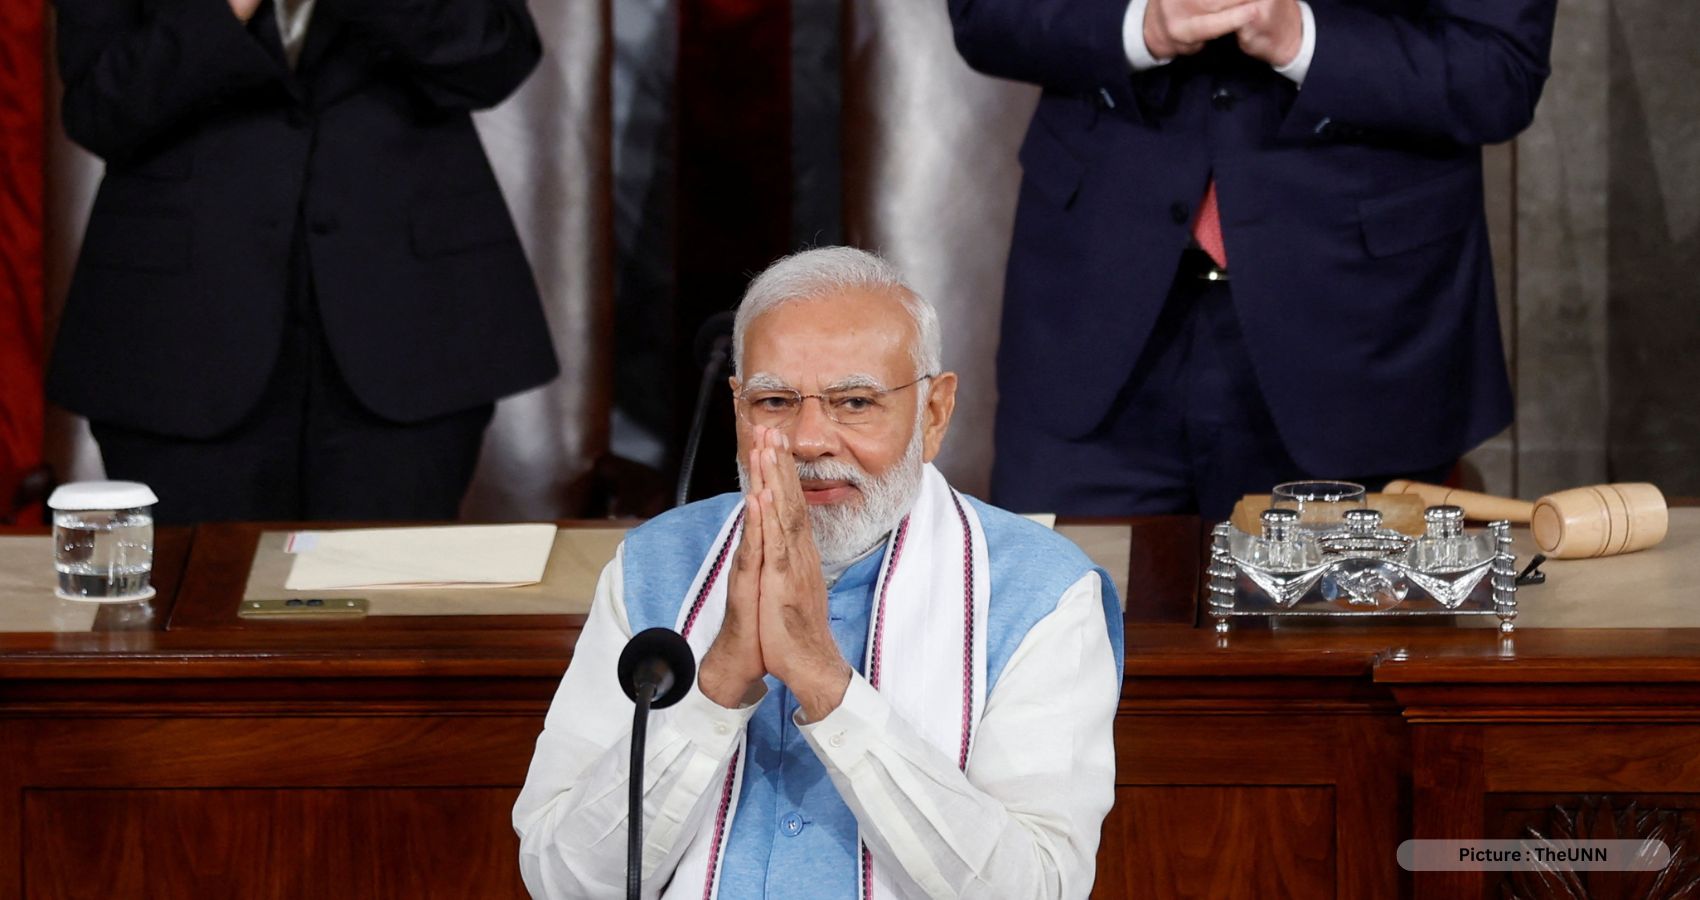 Indian Prime Minister’s Visit to Washington Signals New Era in US-India Relations